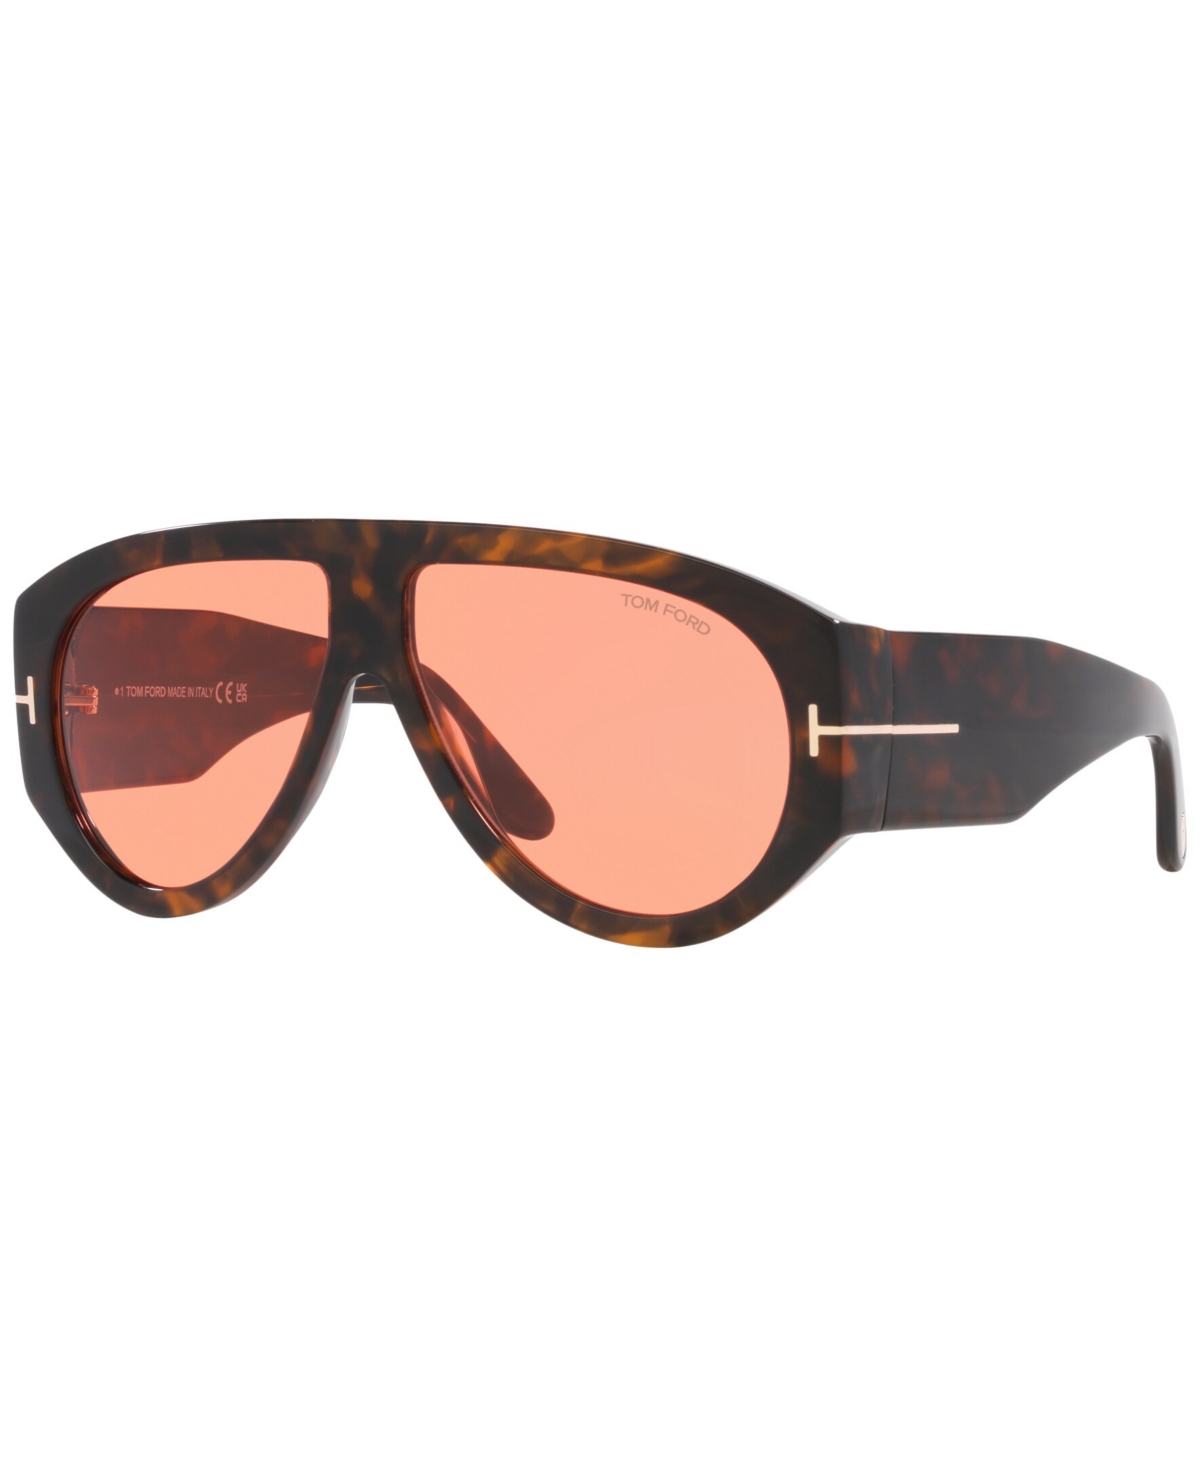 Tom Ford Man Sunglass Ft1044 In Red